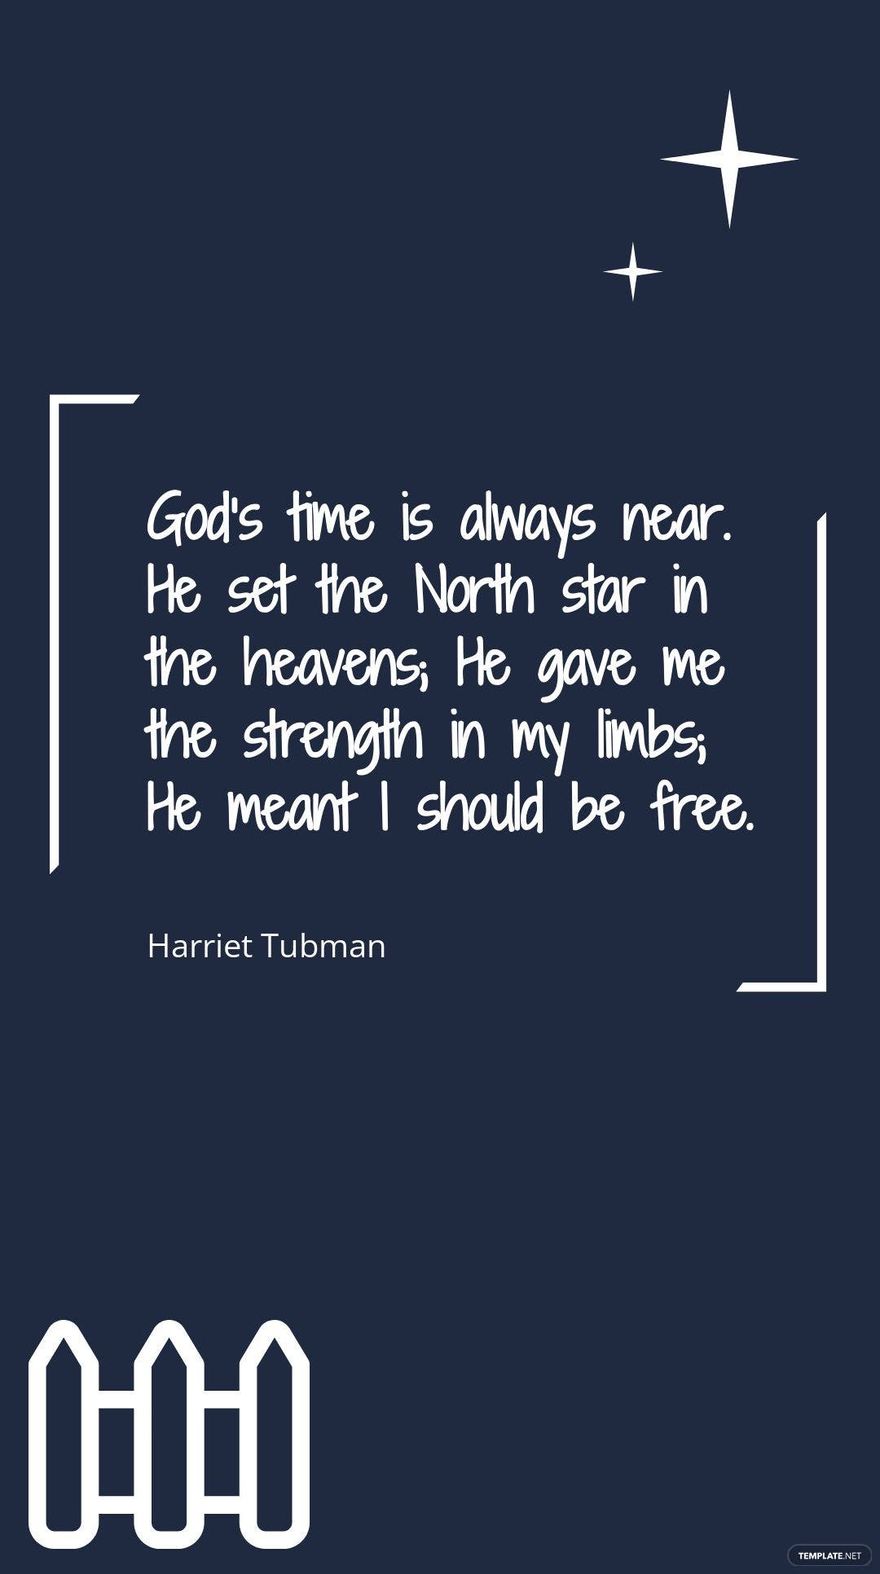 Harriet Tubman - God’s time is always near. He set the North star in the heavens; He gave me the strength in my limbs; He meant I should be free.